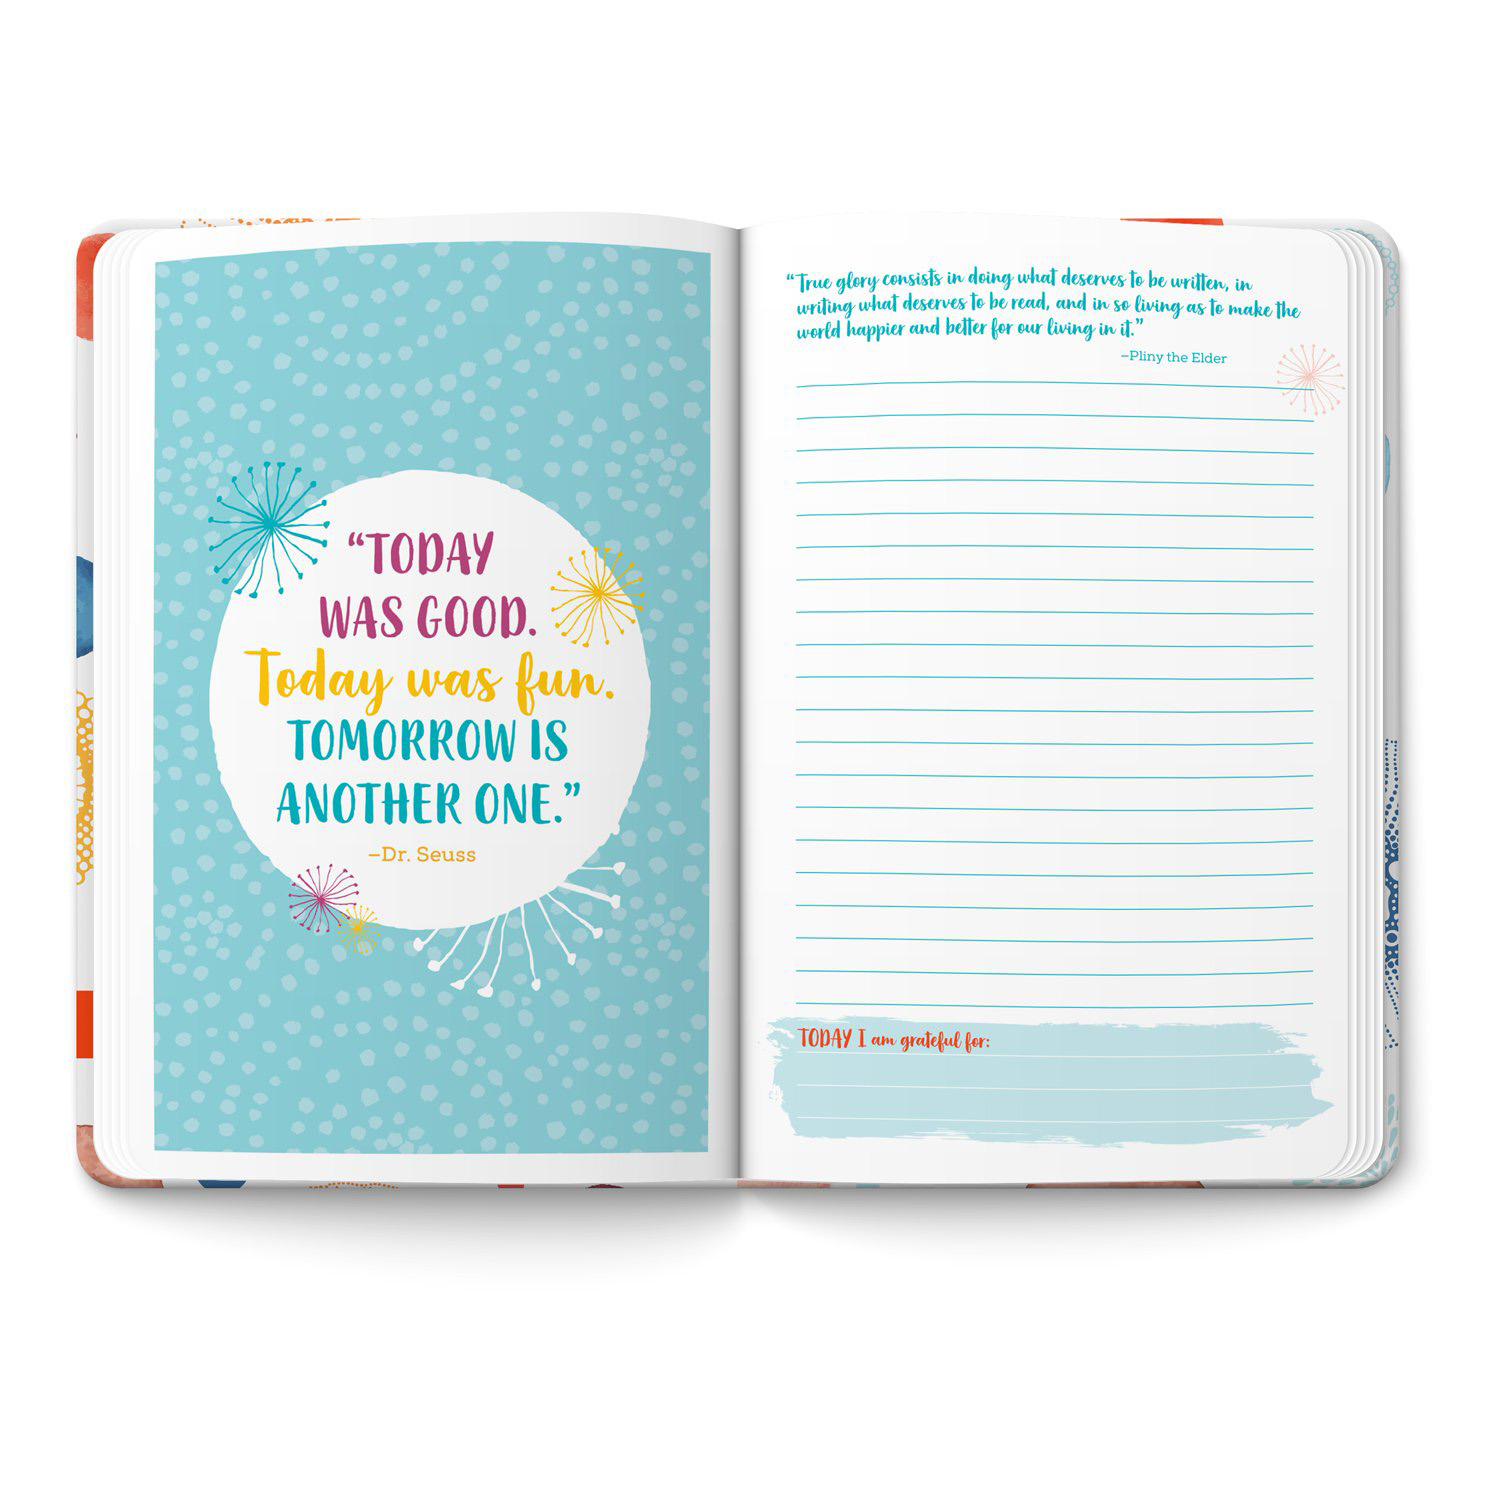 Corso Live Happy Notebook (Gratitude Journal, Daily Quote on Mindful Living, Business Notebook, Personal Diary) - image 4 of 9